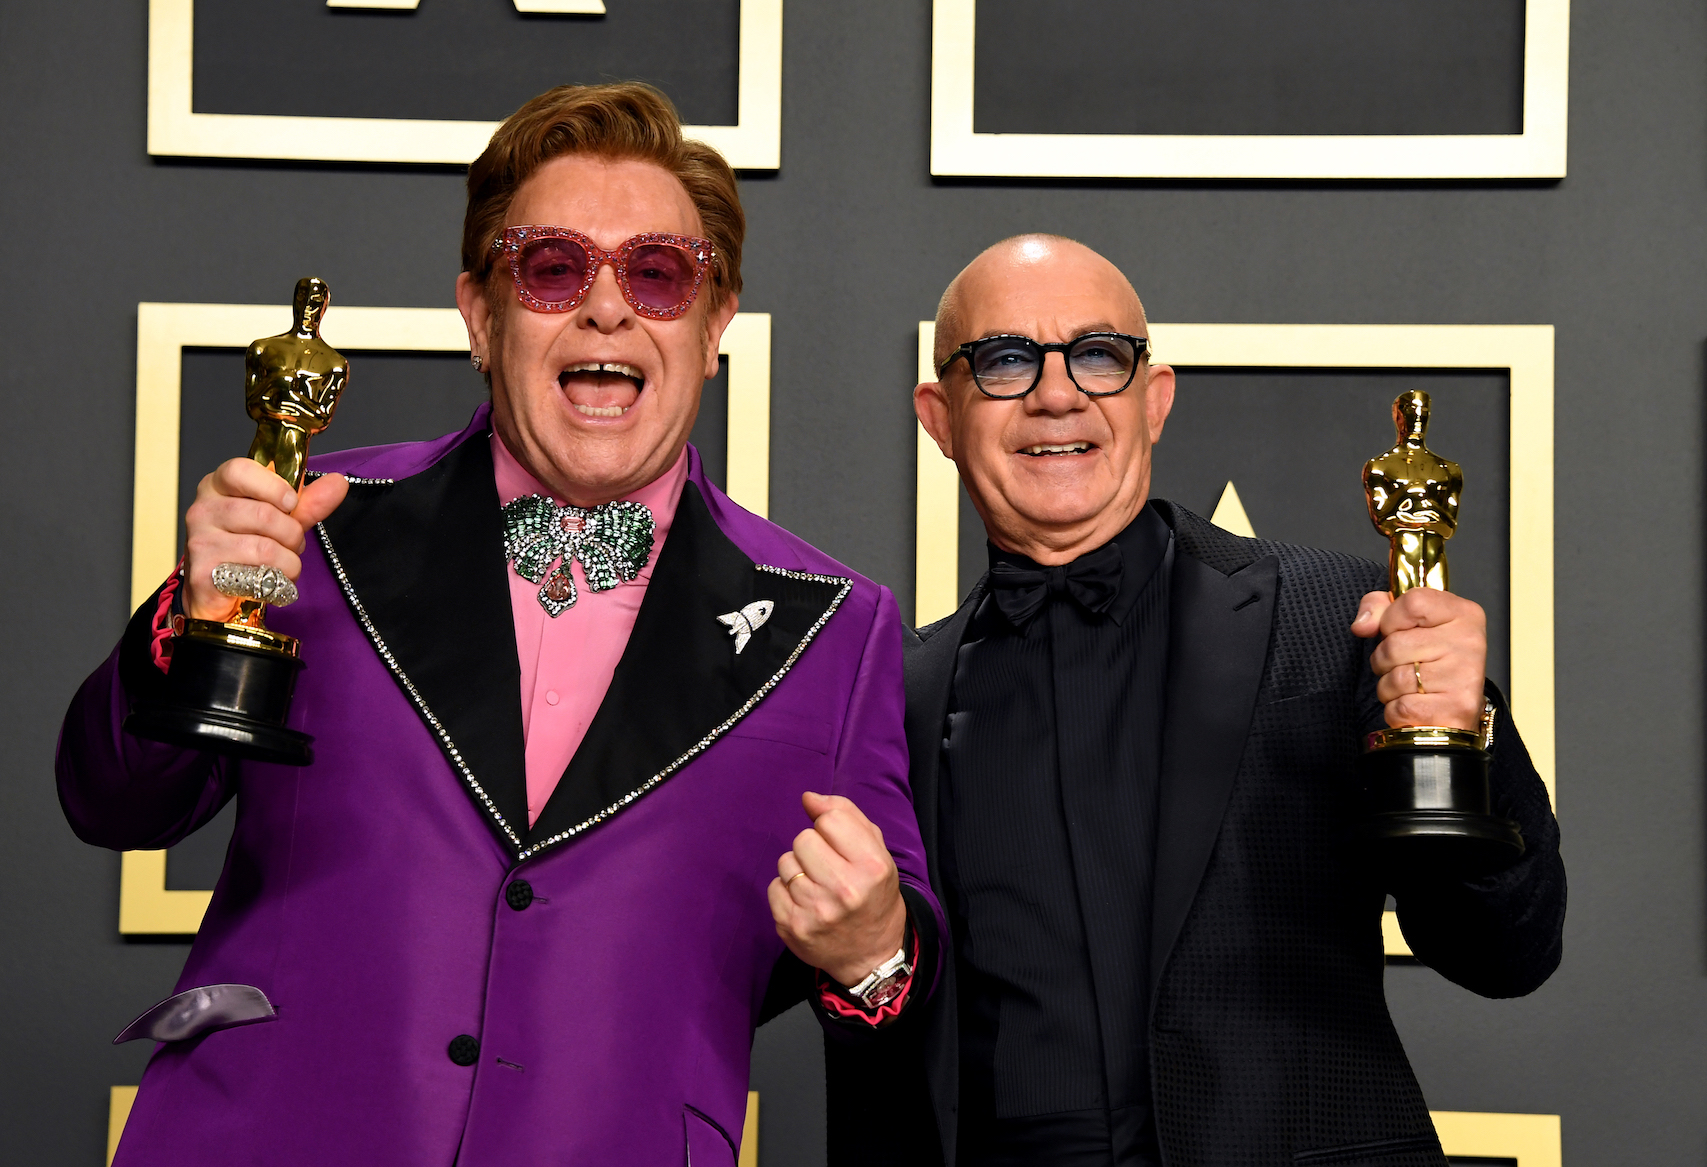 Elton John and Bernie Taupin attend the 92nd Academy Awards in Hollywood, Los Angeles